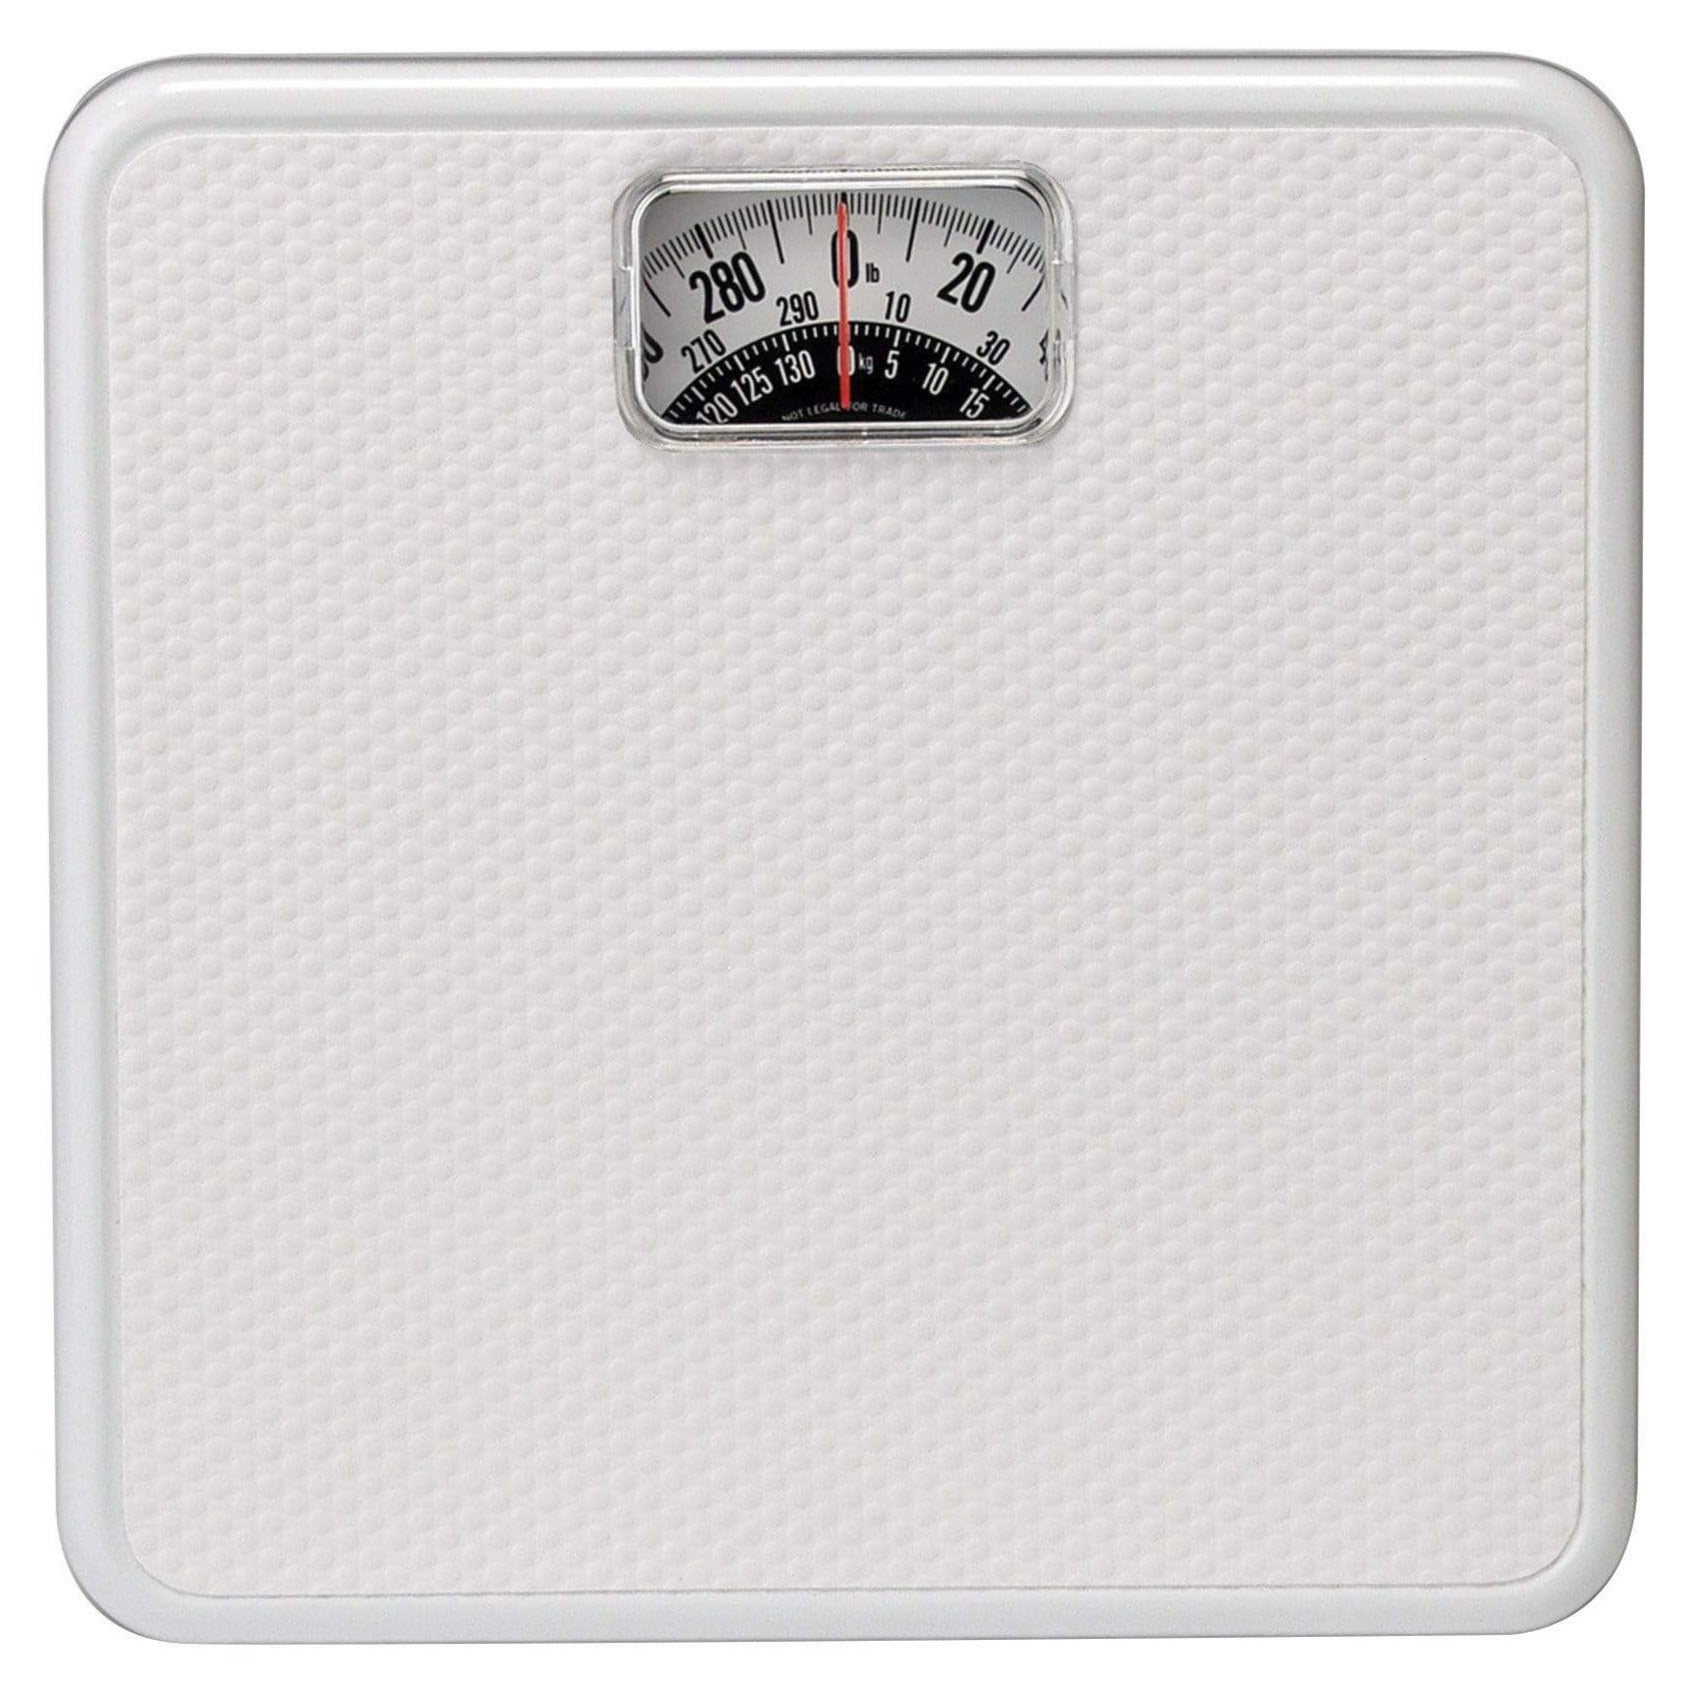 Taylor Precision Products Analog Scales for Body Weight, 330LB Capacity,  Easy